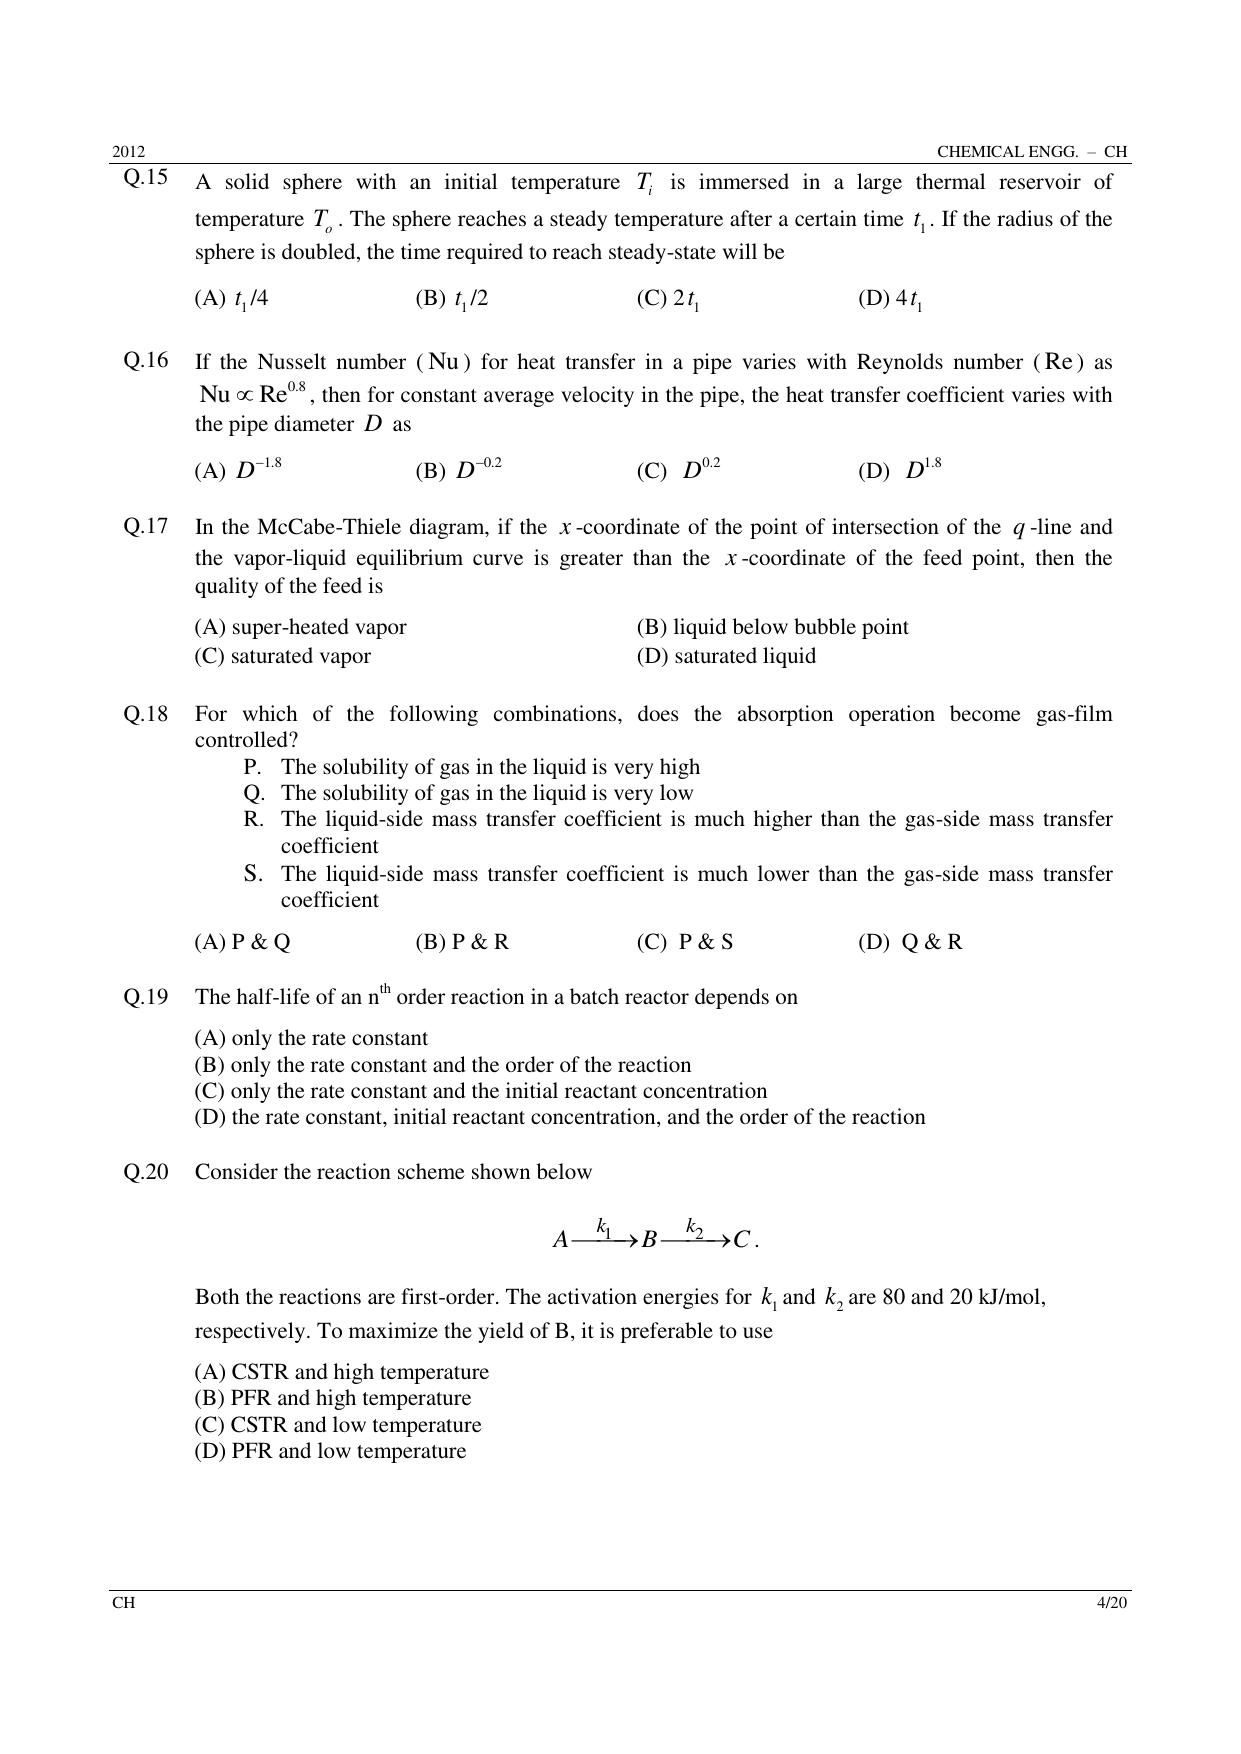 GATE 2012 Chemical Engineering (CH) Question Paper with Answer Key - Page 4